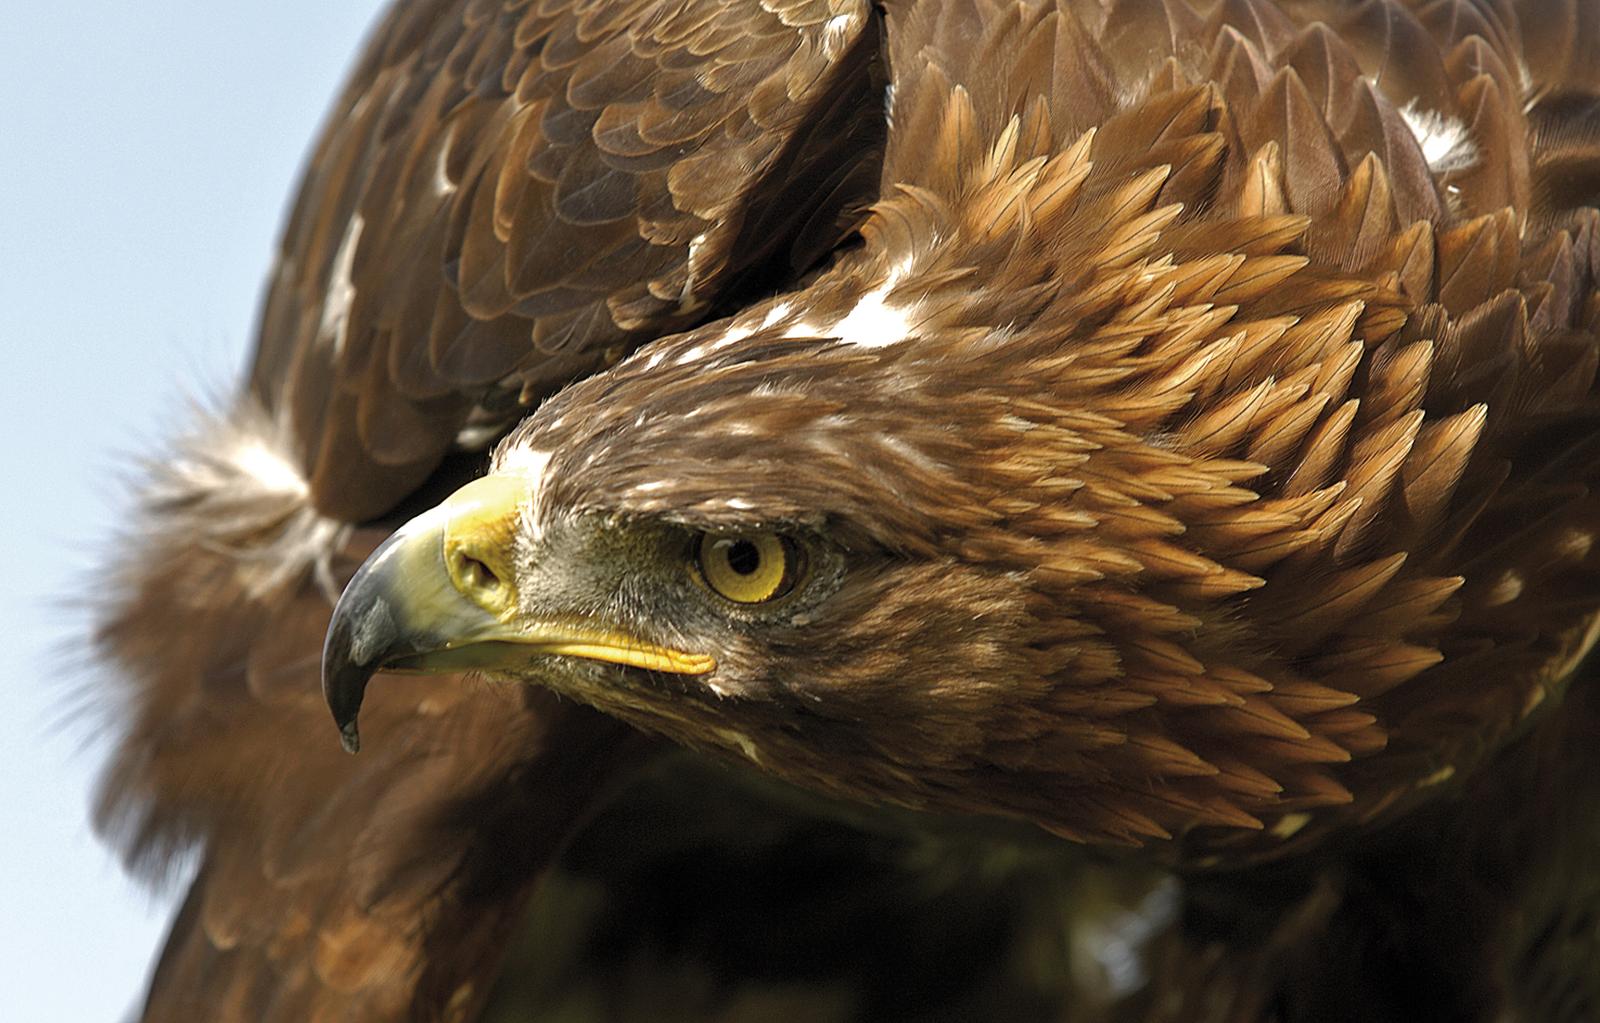 Mobile Desktop Background Hd Picture Of The Eagle